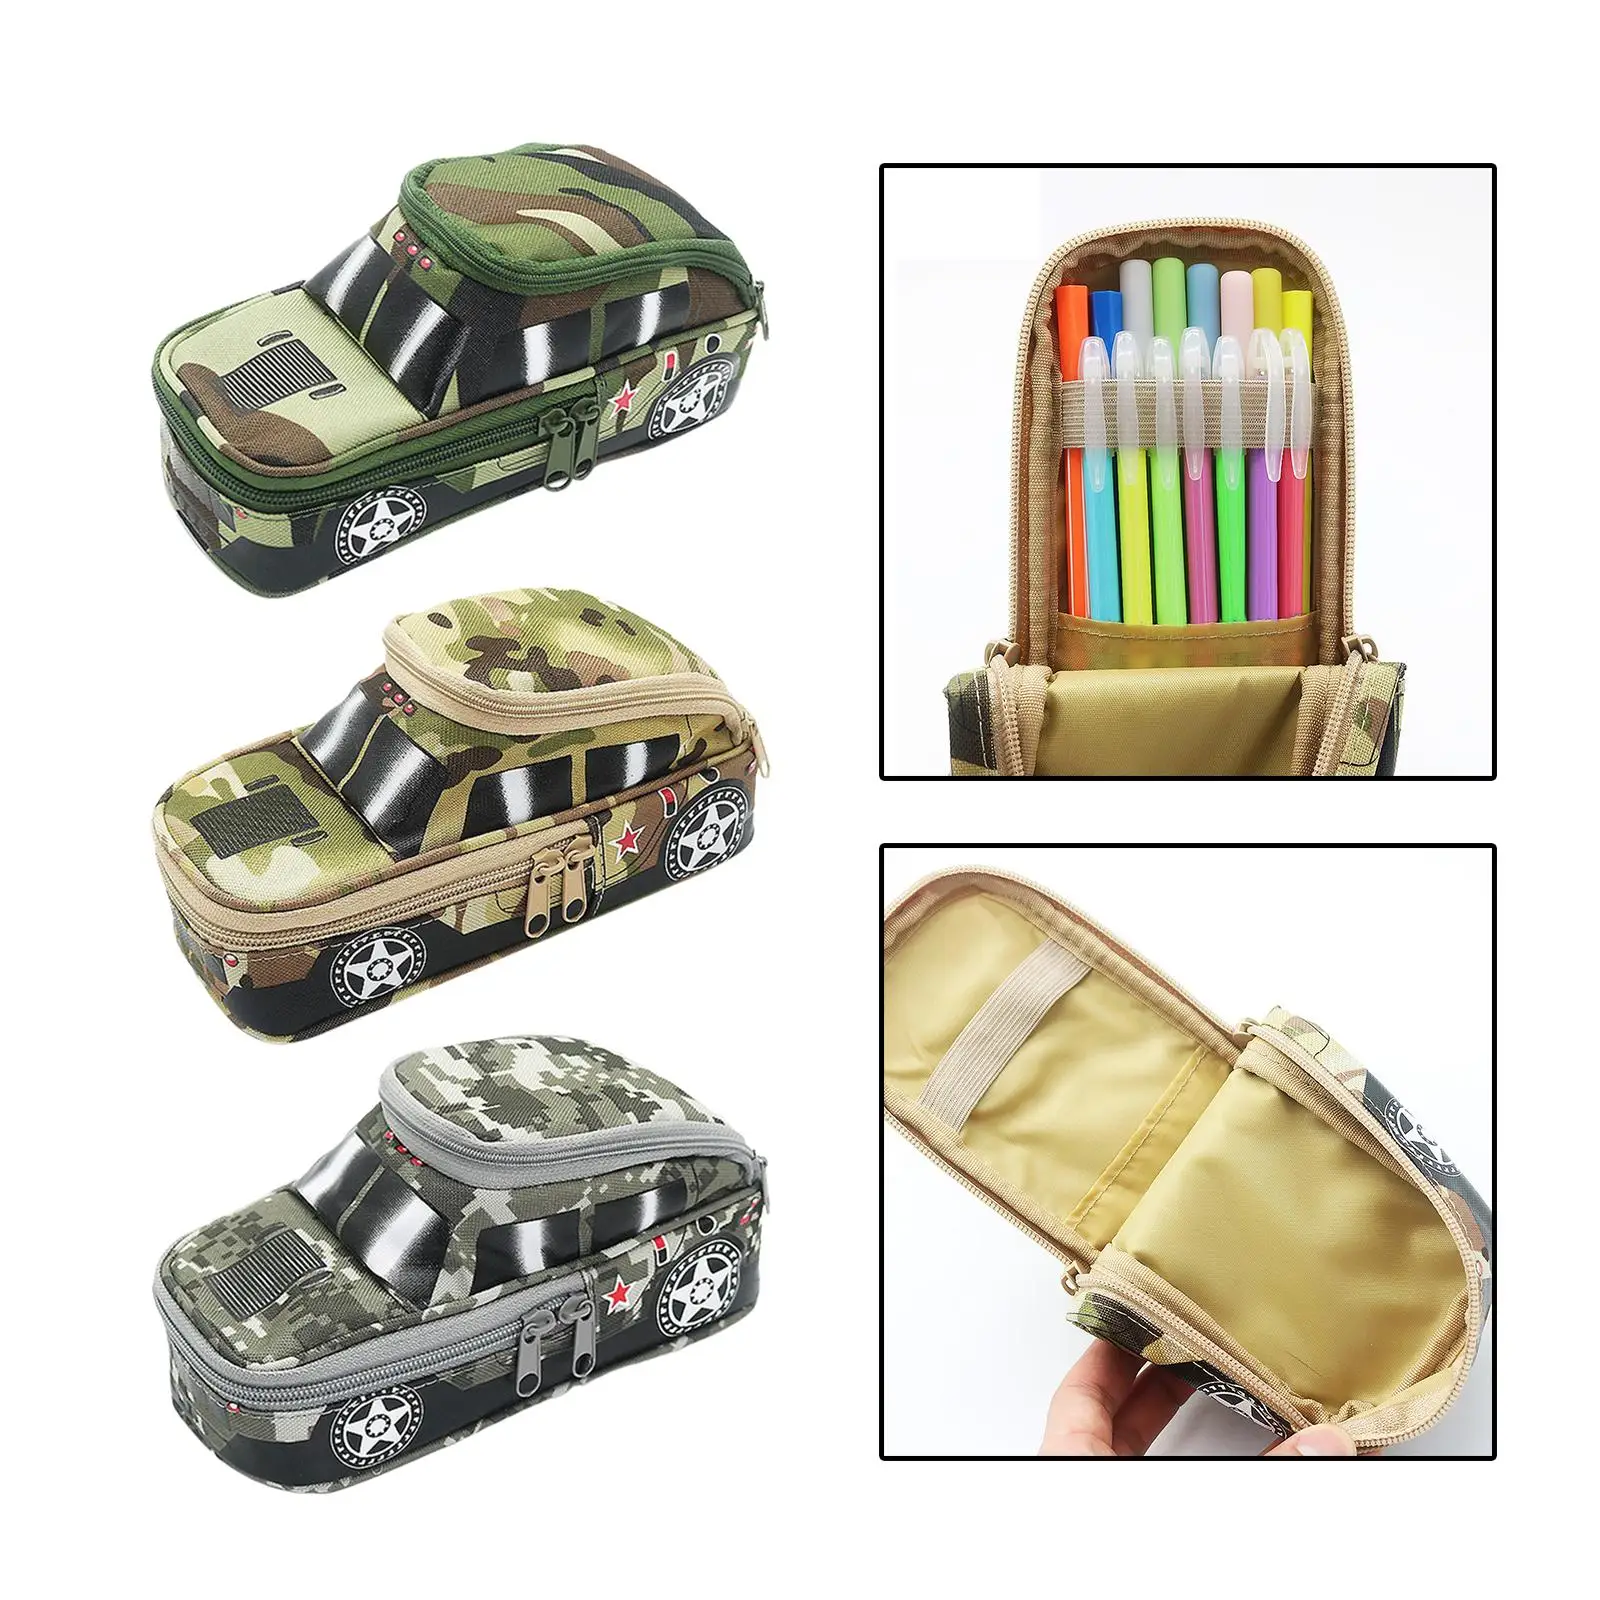 Pen Case Multifunction Stationery Organizer Portable Pencil Bag Pen Pouch for School Kids Boys and Girls Children Birthday Gifts